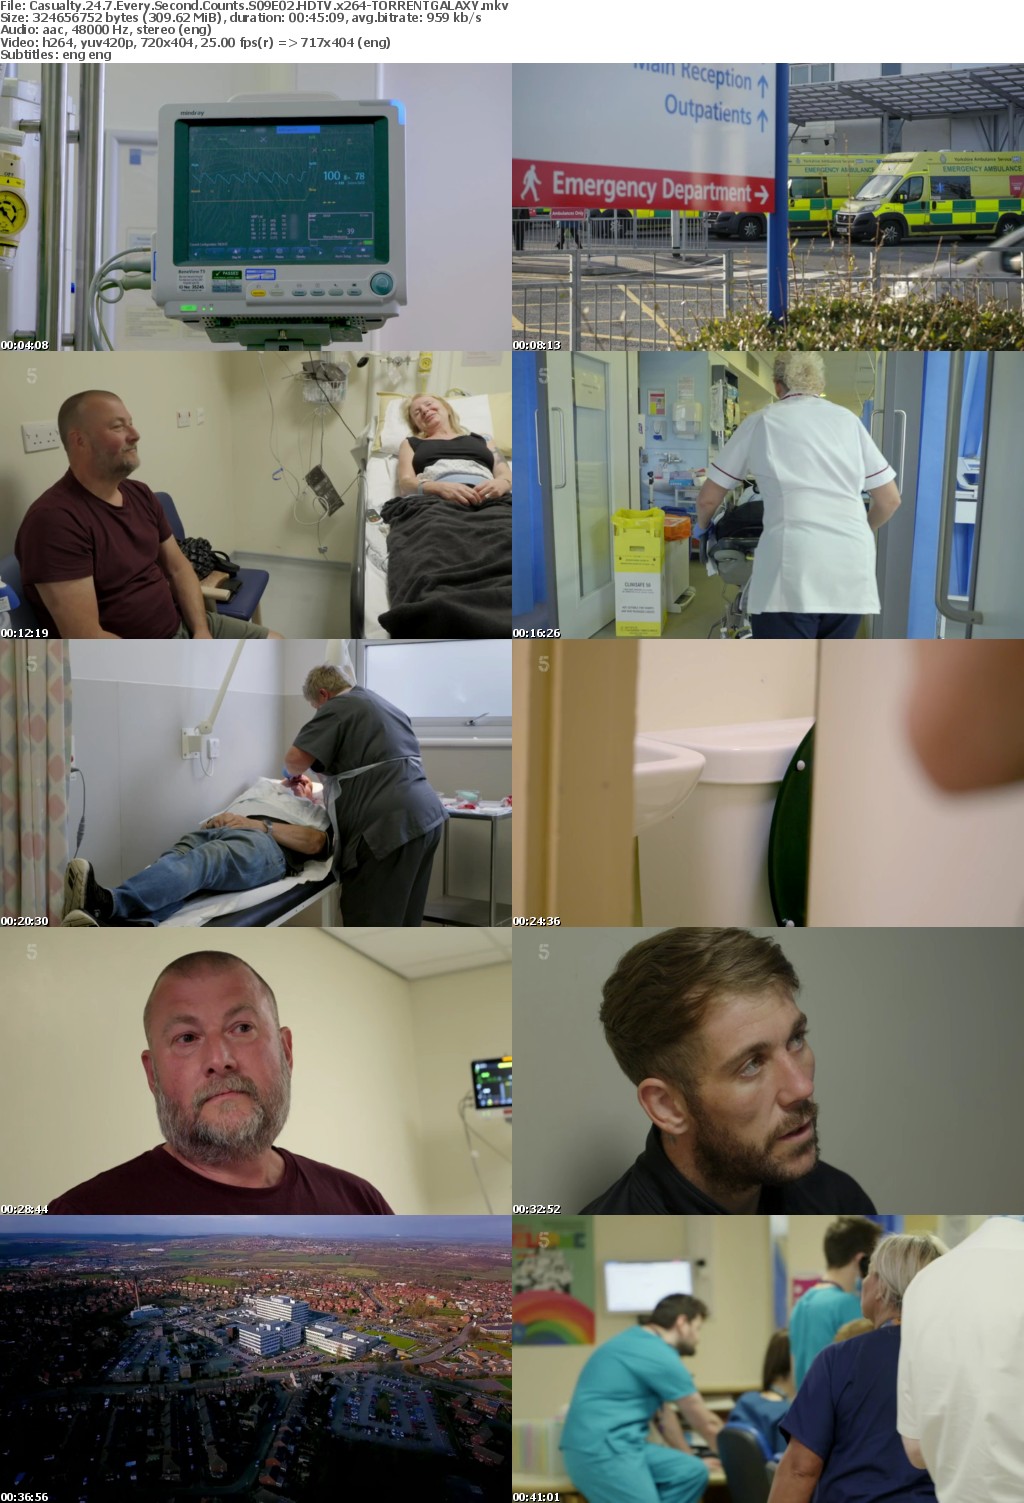 Casualty 24 7 Every Second Counts S09E02 HDTV x264-GALAXY